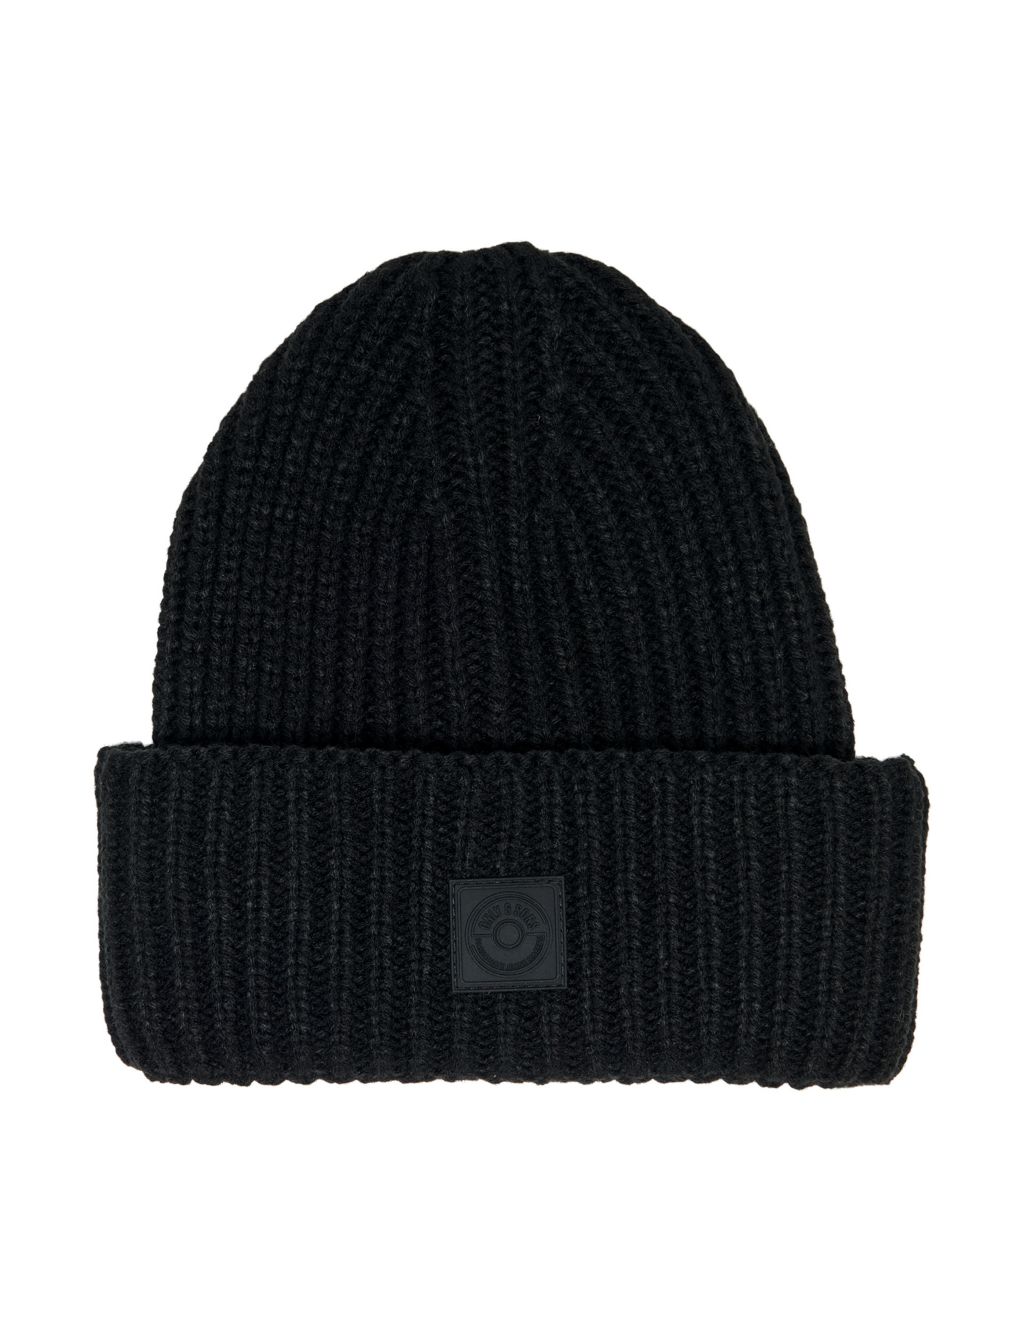 Textured Knitted Beanie Hat image 1